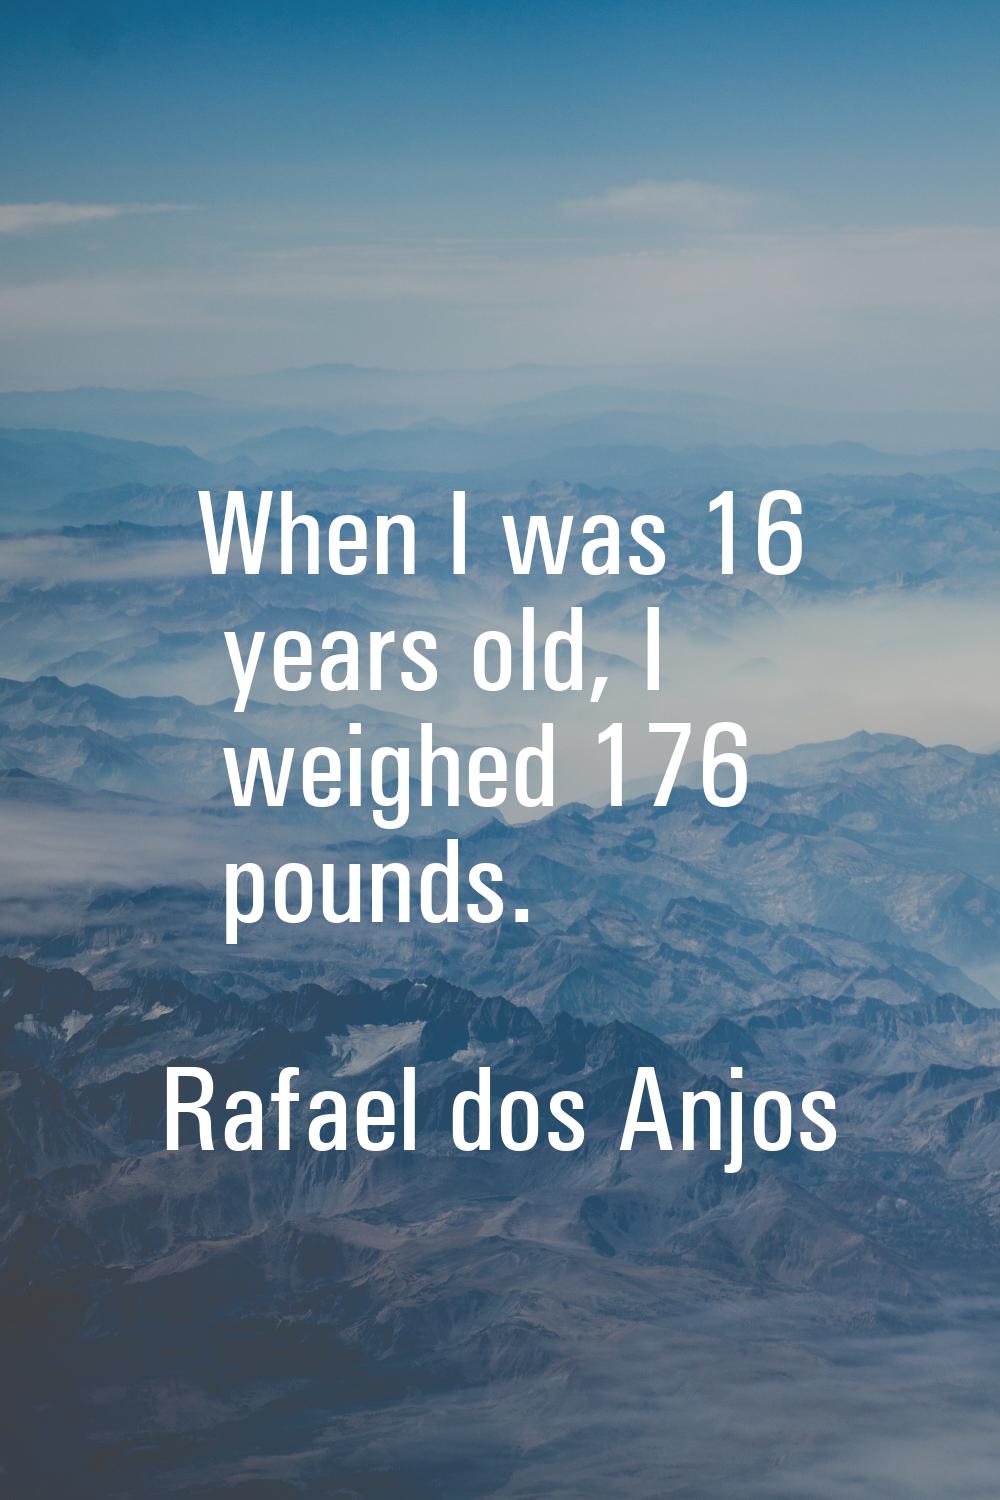 When I was 16 years old, I weighed 176 pounds.